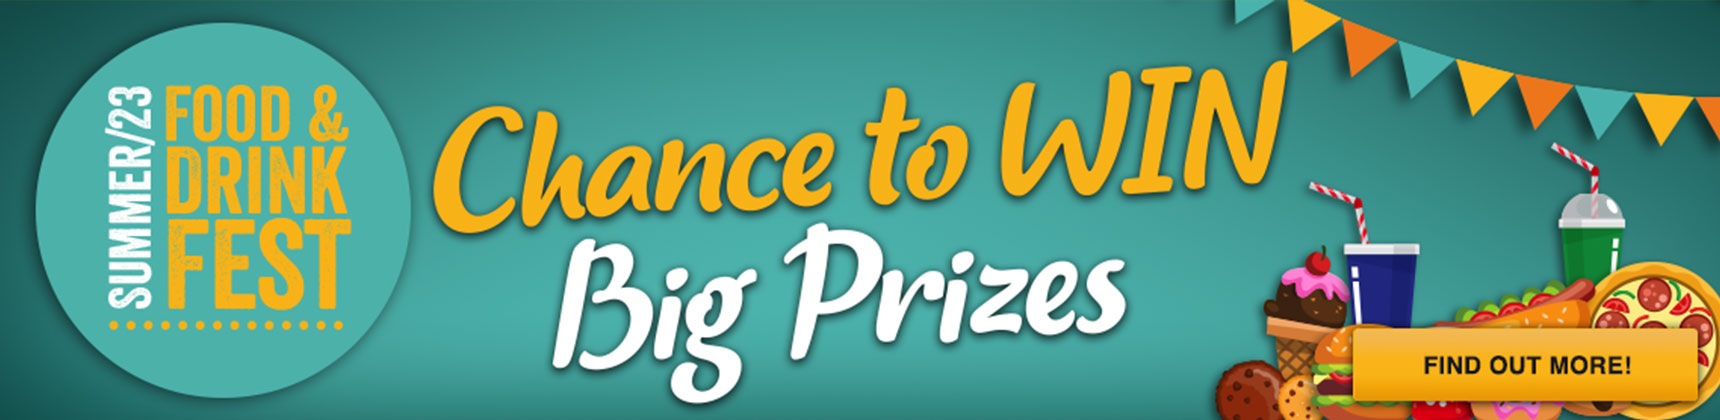 Chance to WIN Big Prizes